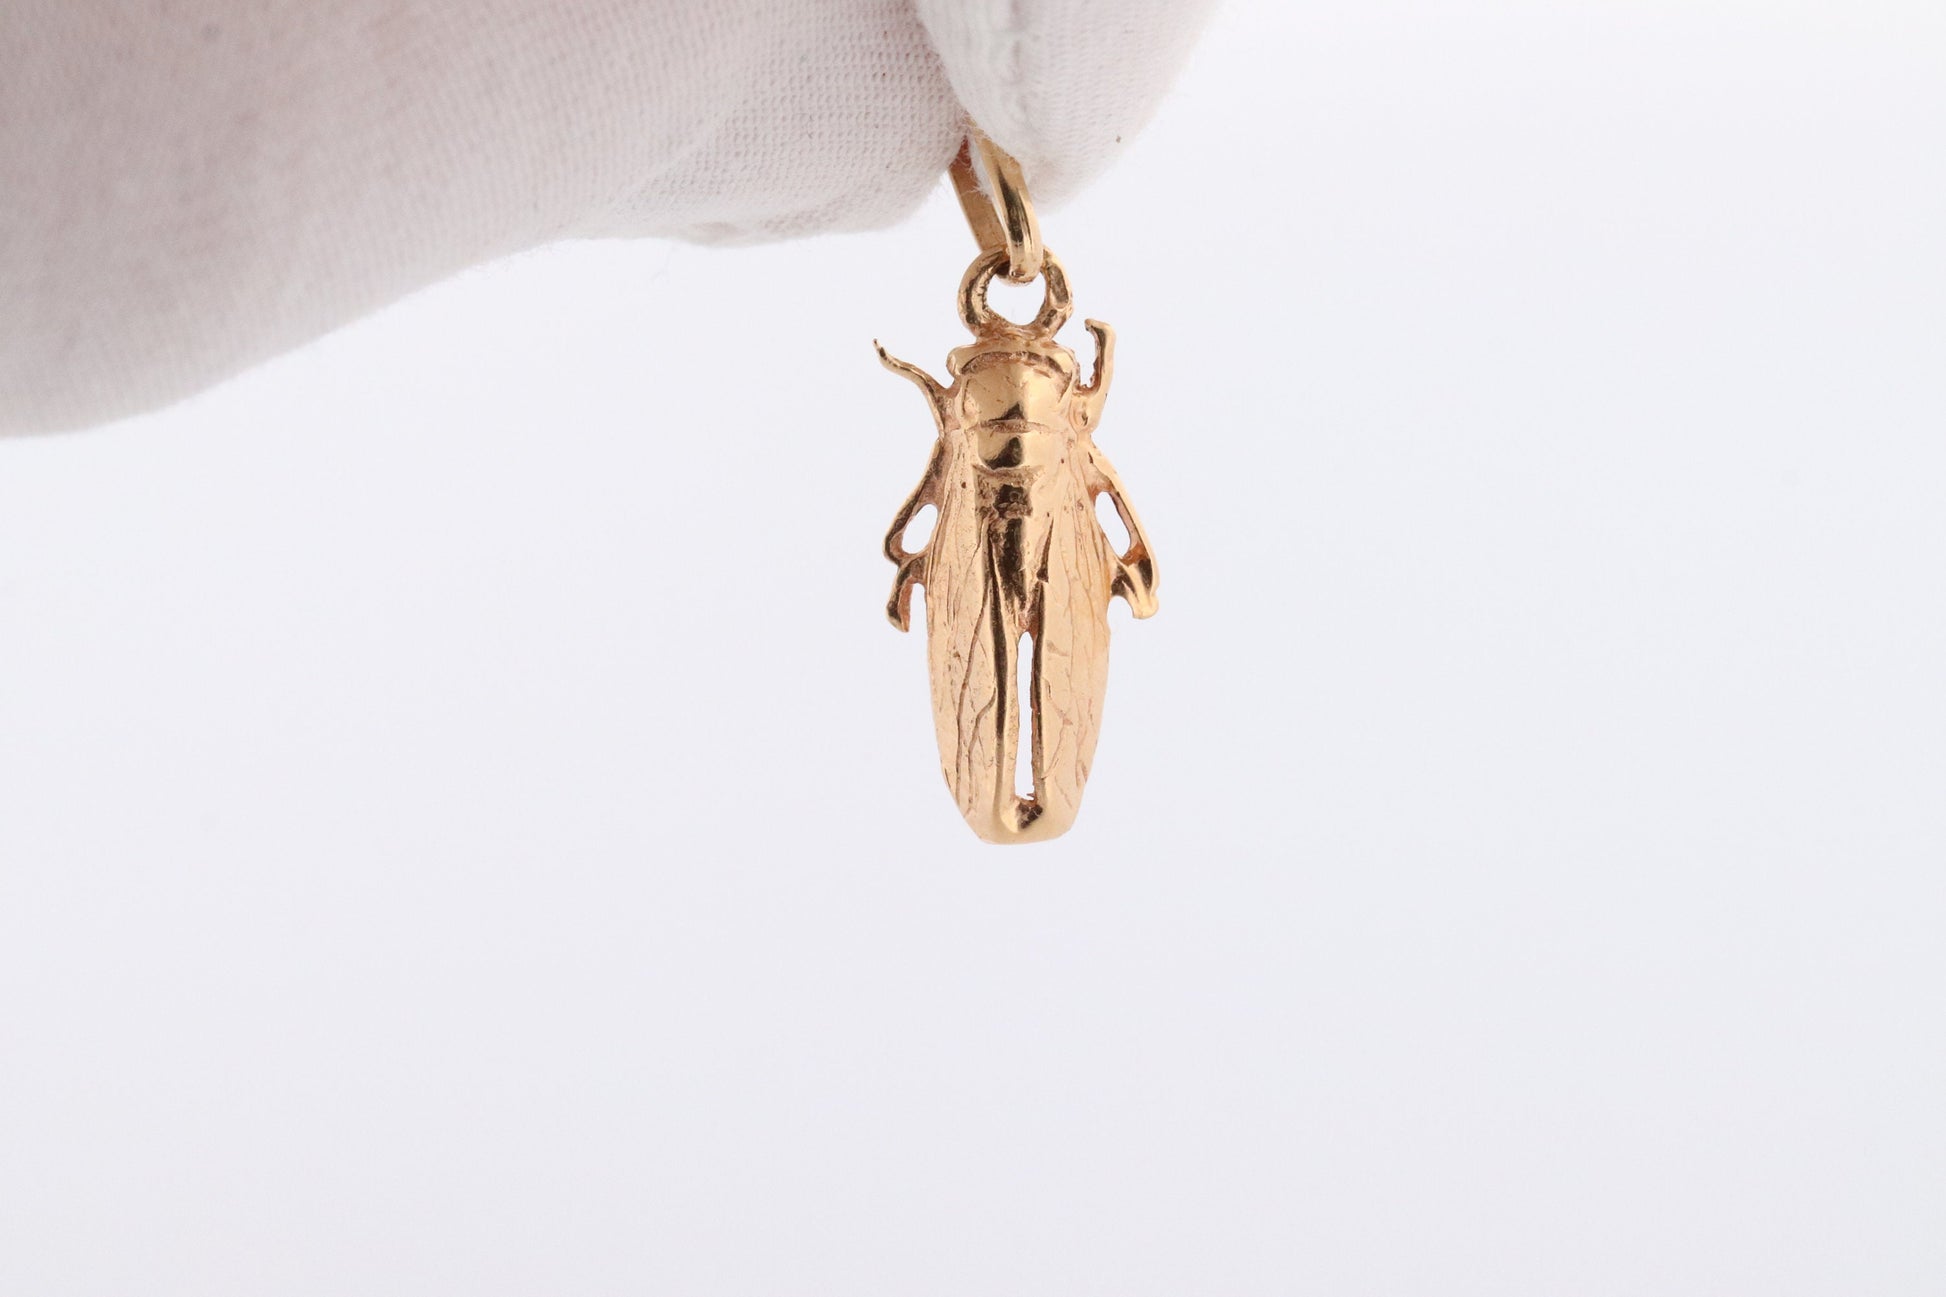 18k FLY Pendant. 18k Solid Yellow gold Fly Insect Charm. st(94)